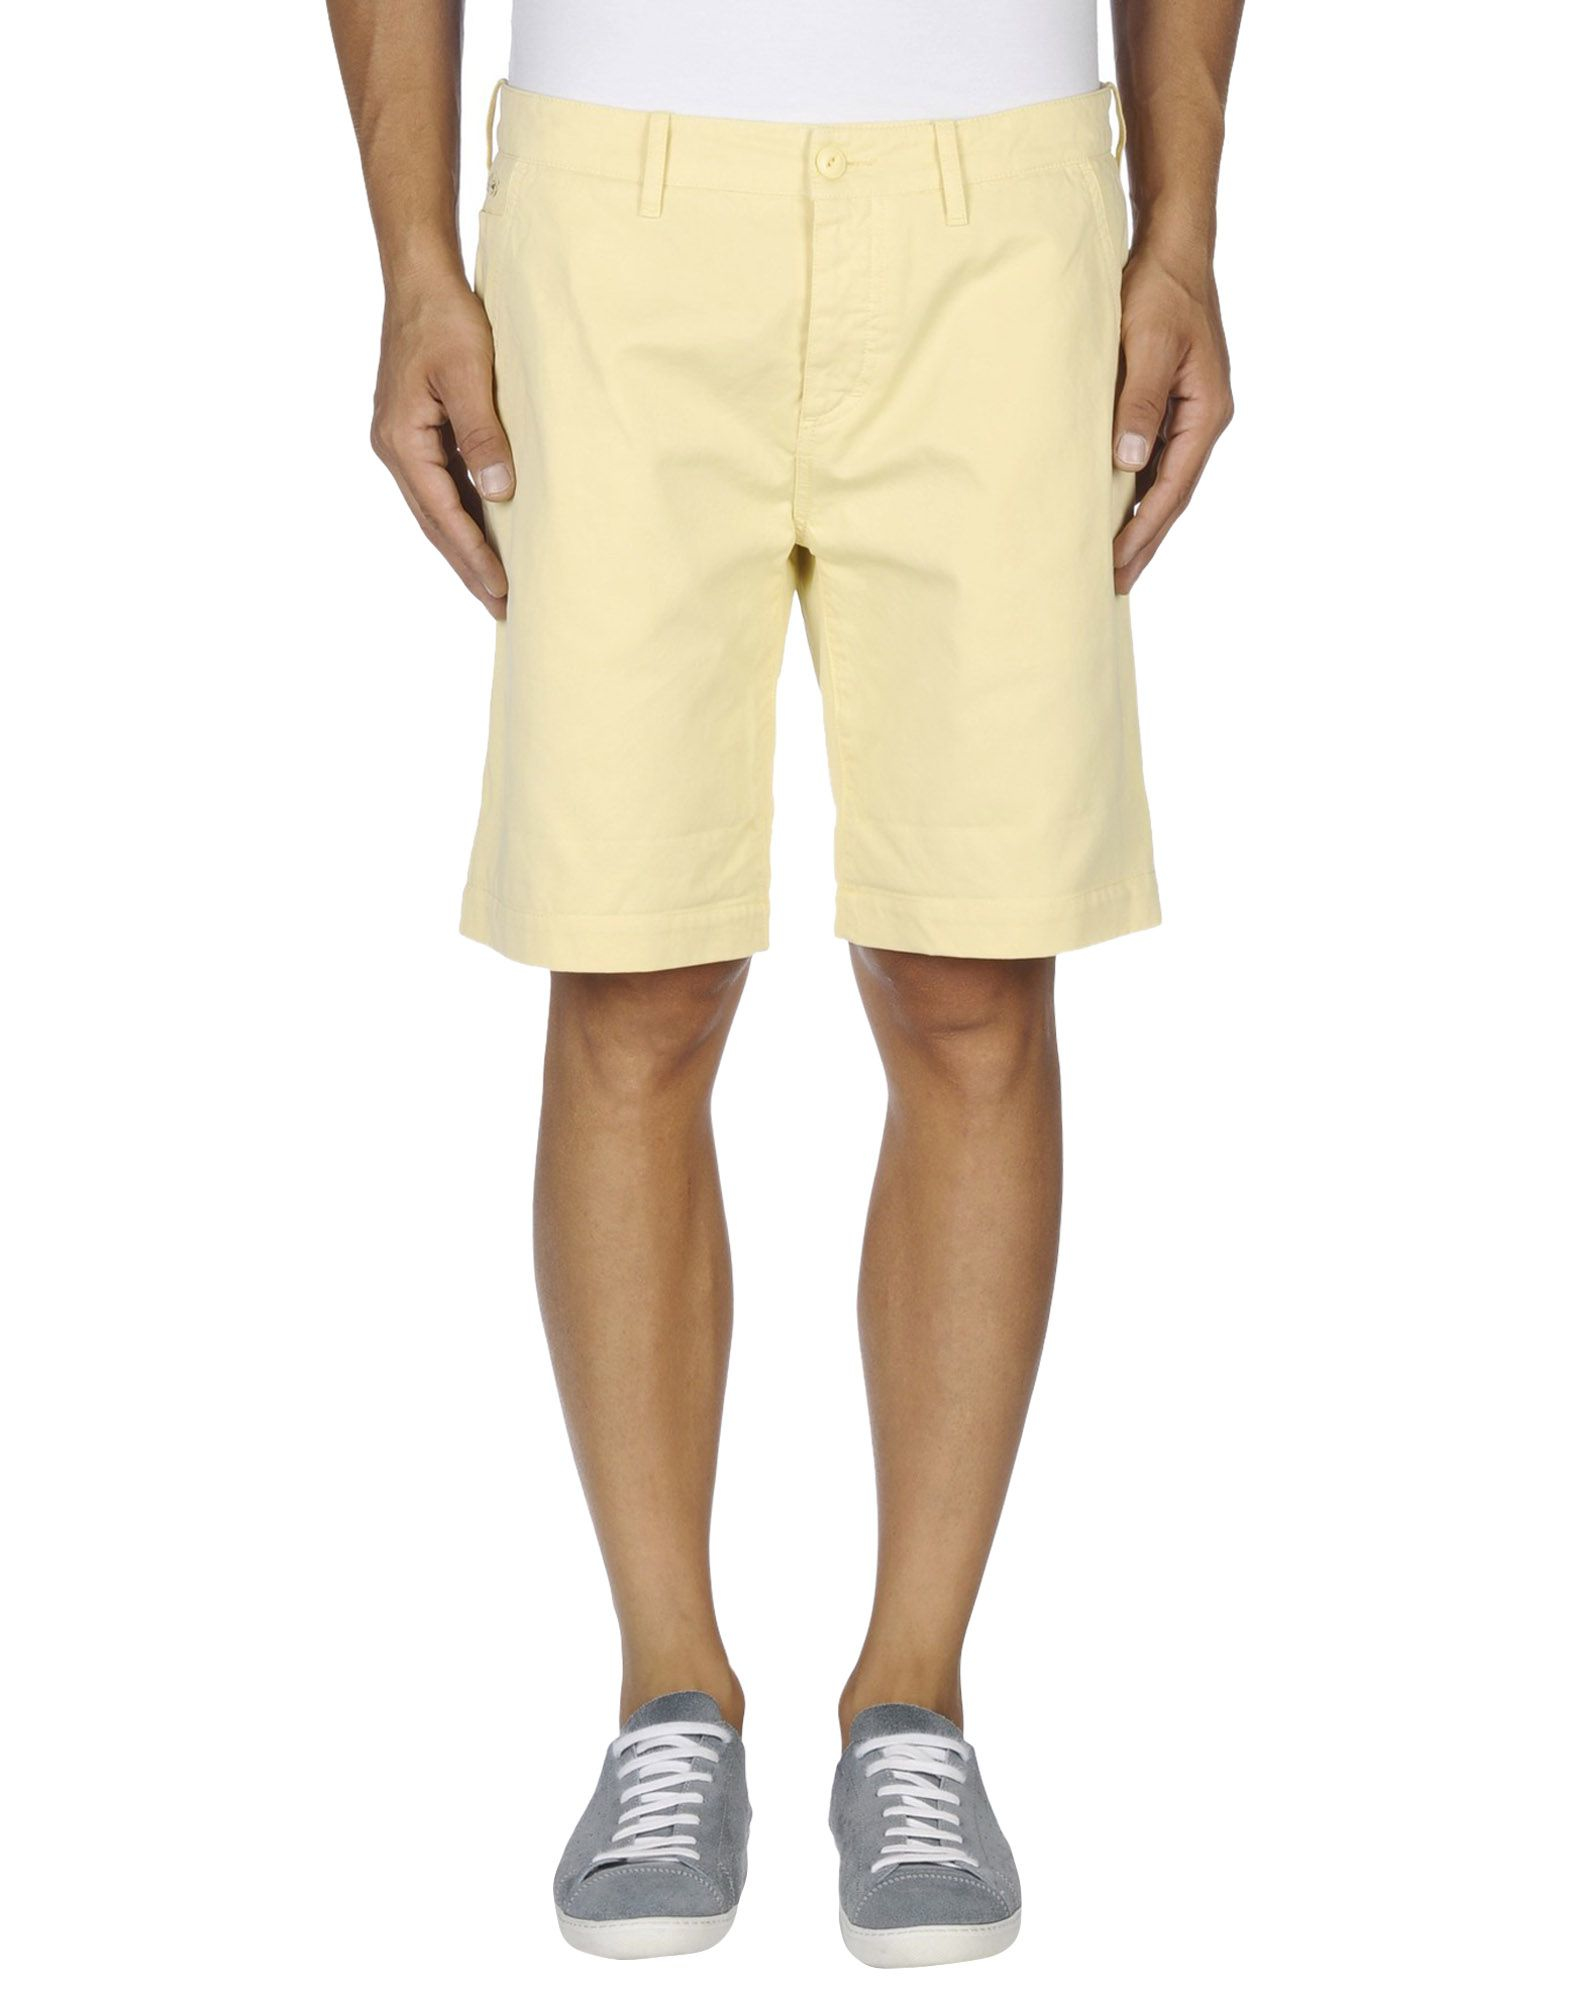 Lyst - Lacoste Bermuda Shorts in Yellow for Men